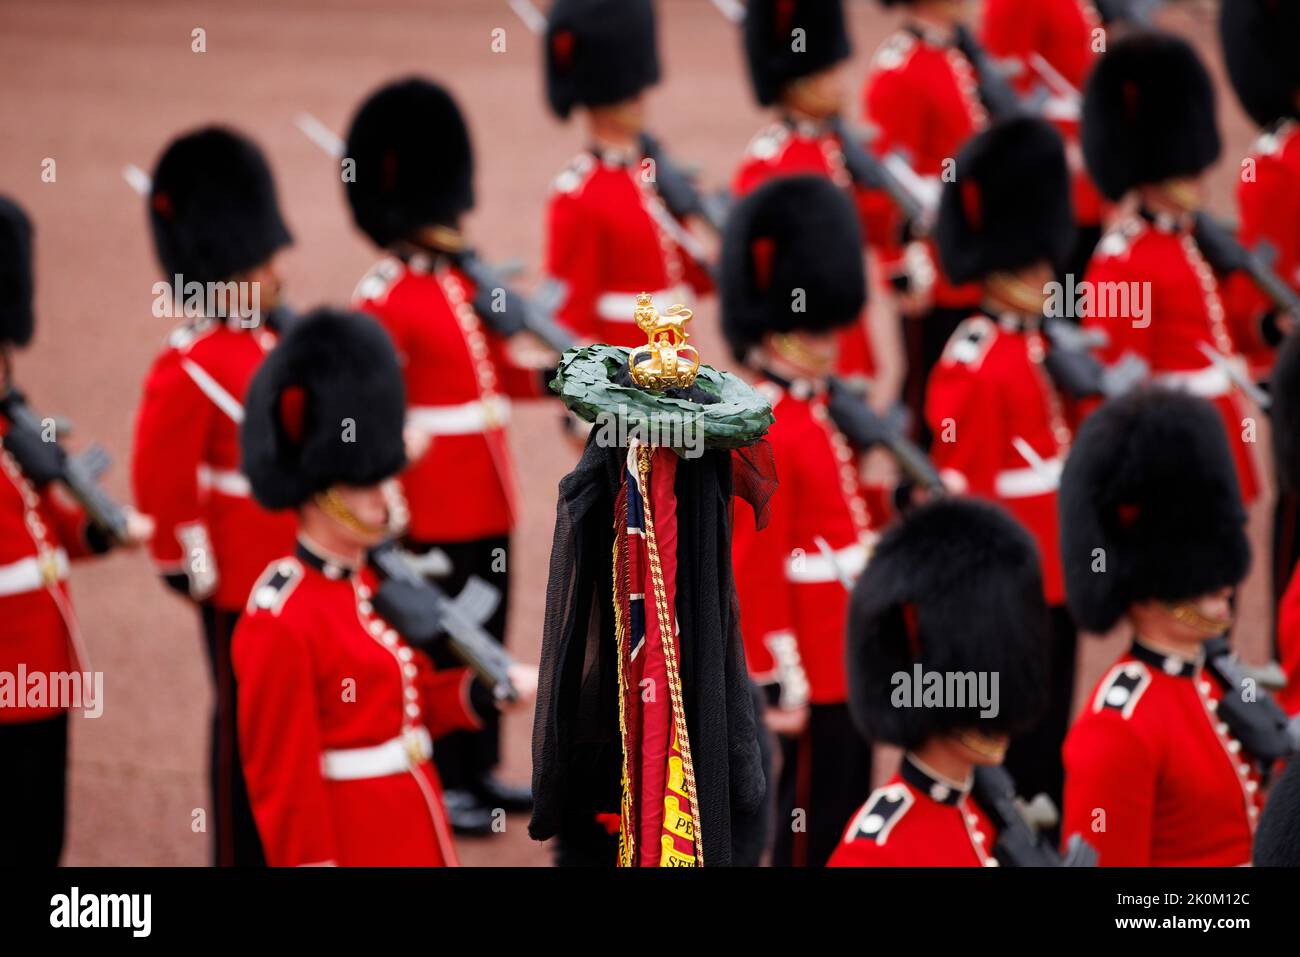 Members of Band of the Coldstream guards take part in the Proclamation ceremony in Friary Court before the accession council, as King Charles III is p Stock Photo